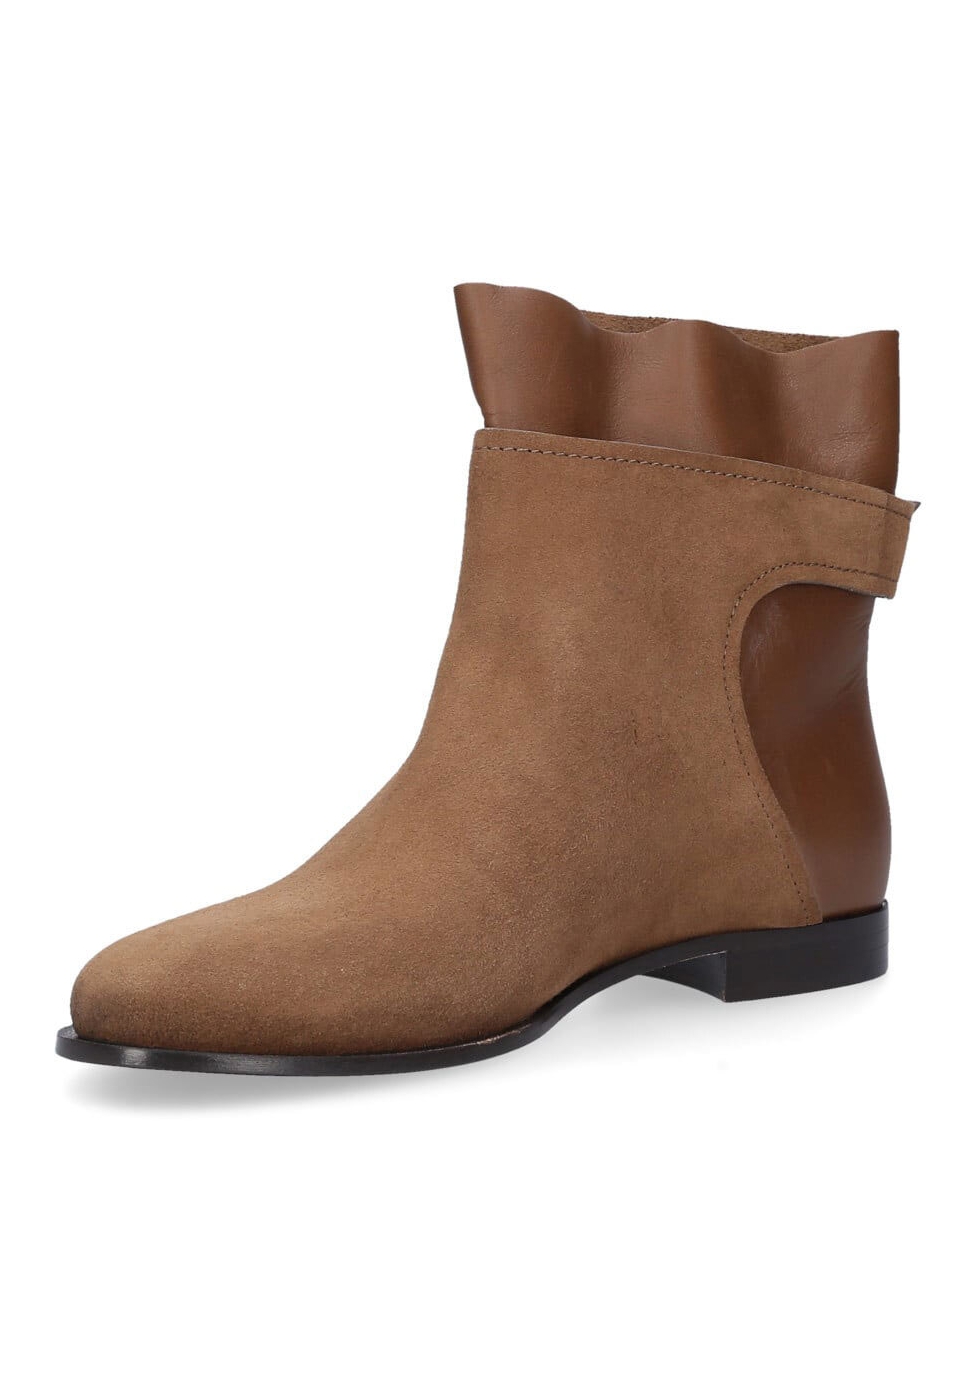 Jimmy Choo flat ankle boots in light brown suede - Italian Boutique